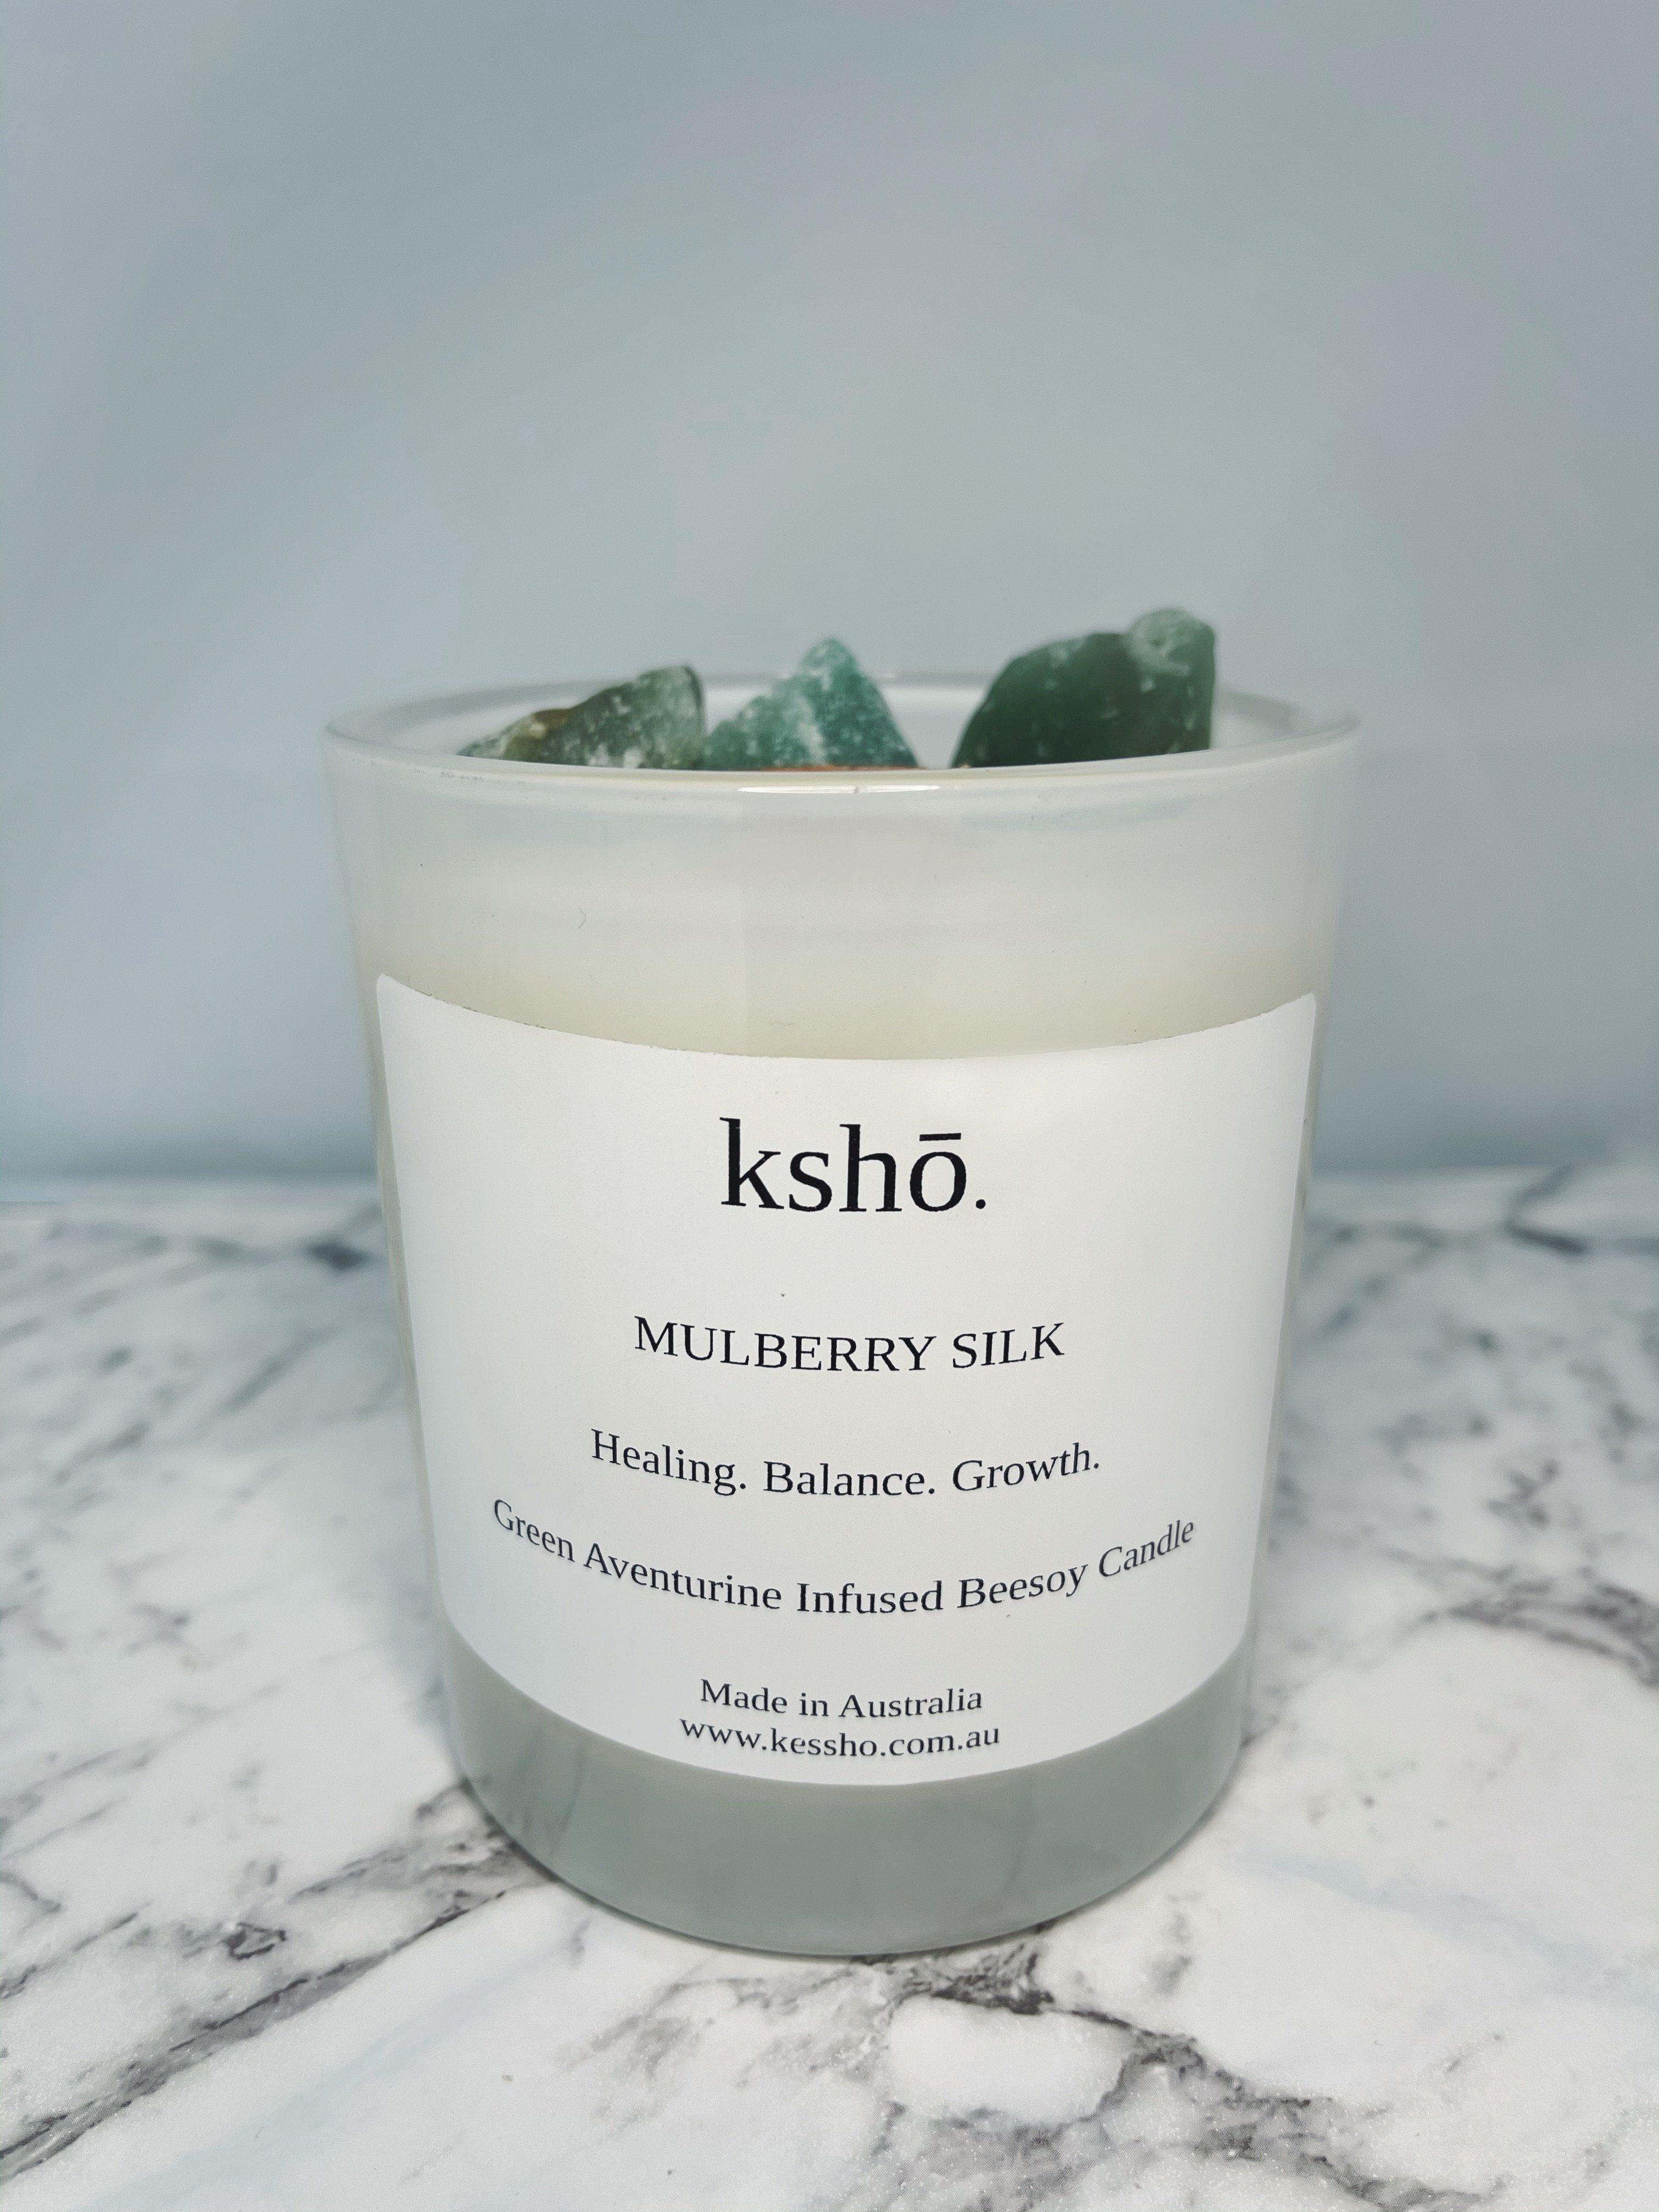 Green Aventurine Infused Beesoy Candle